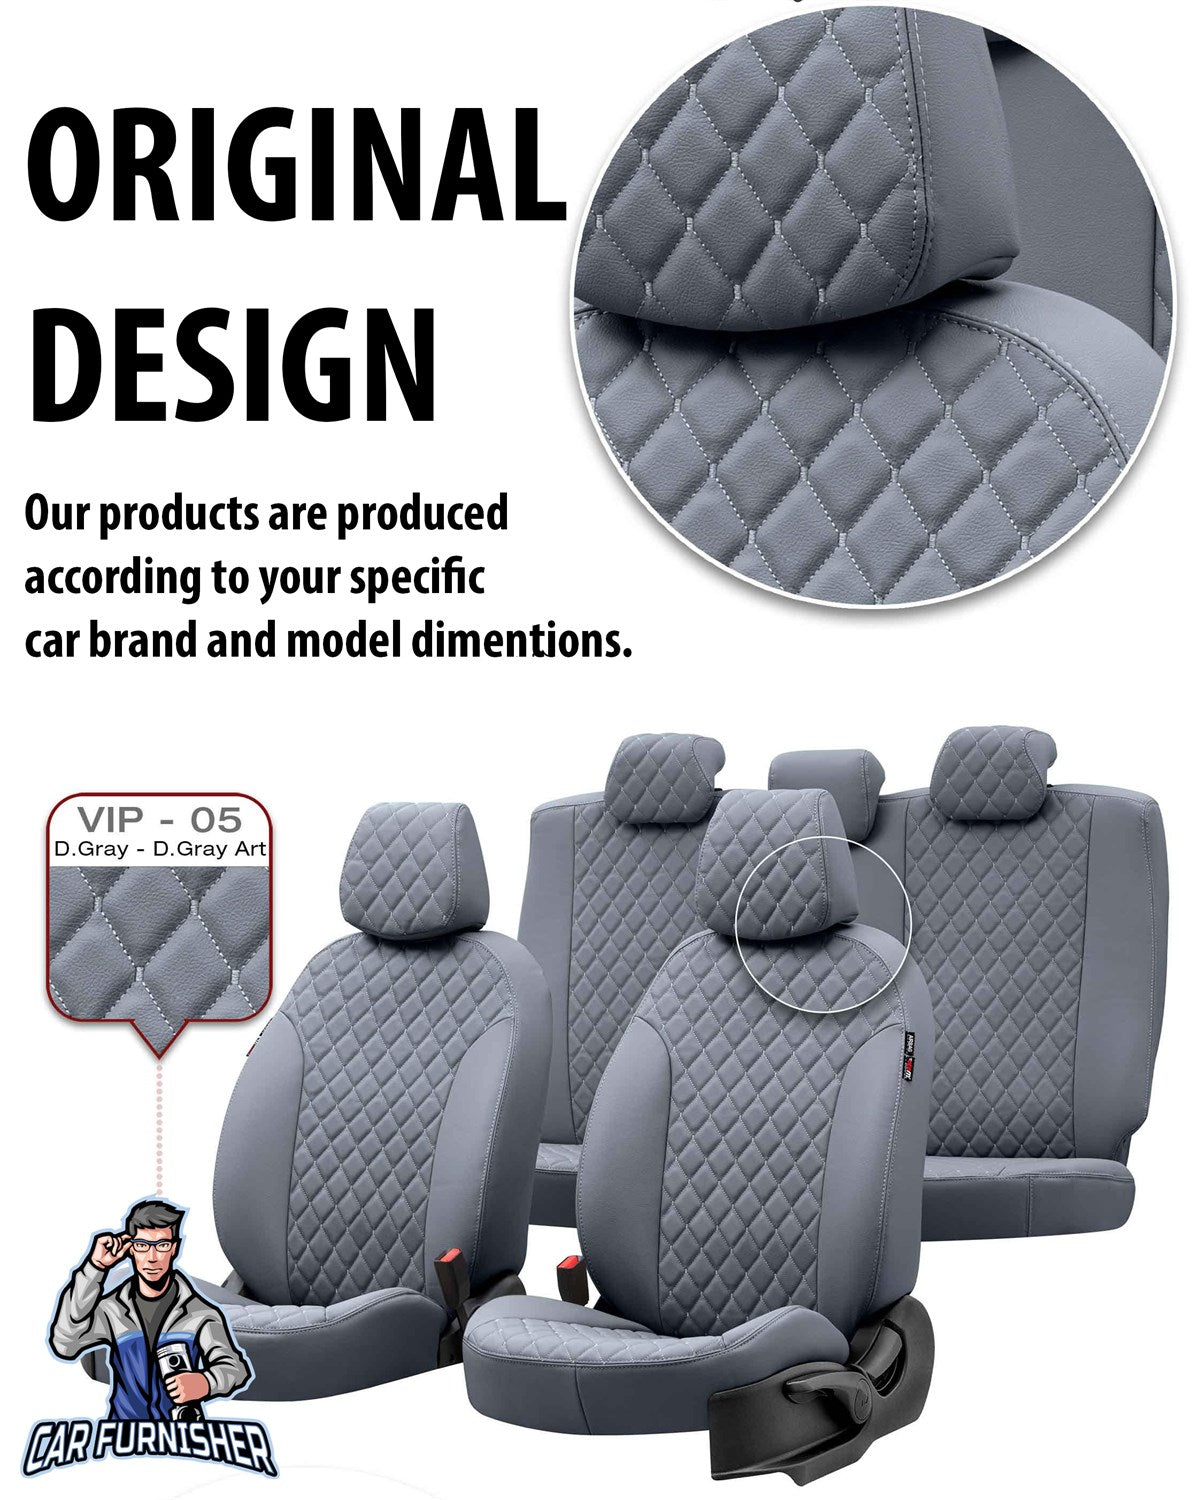 Porsche Cayenne Seat Covers Madrid Leather Design Beige Leather